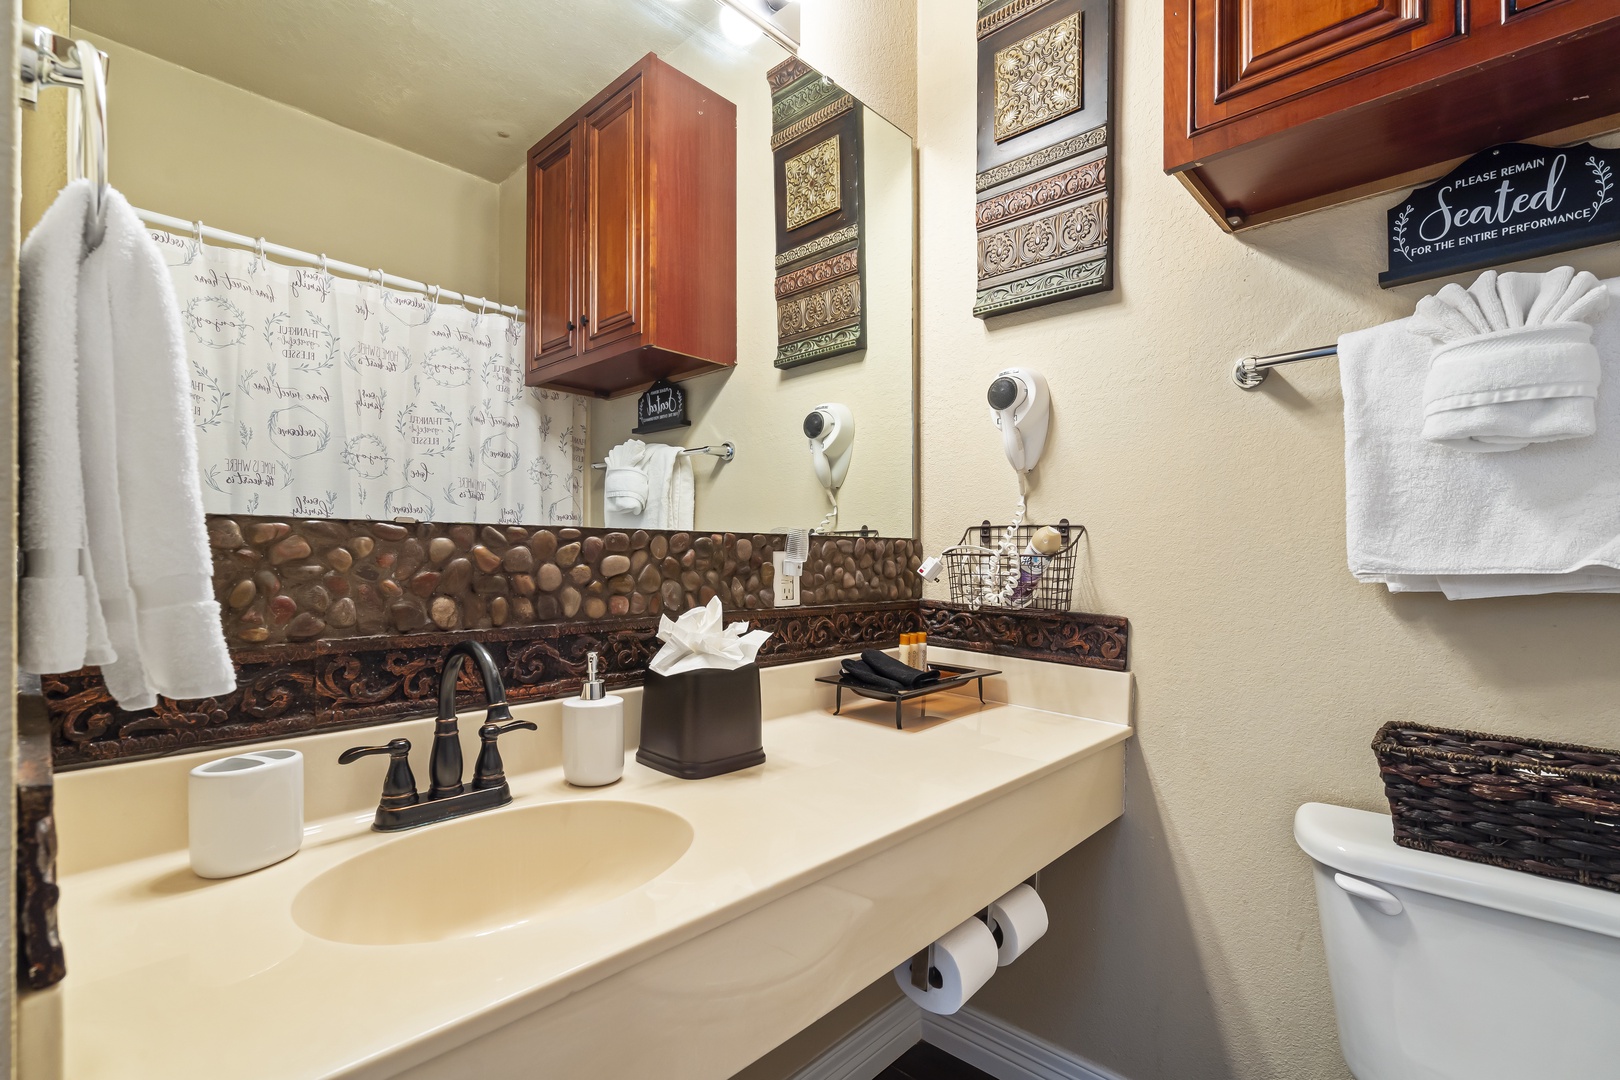 The bathroom includes a single vanity & shower/tub combo